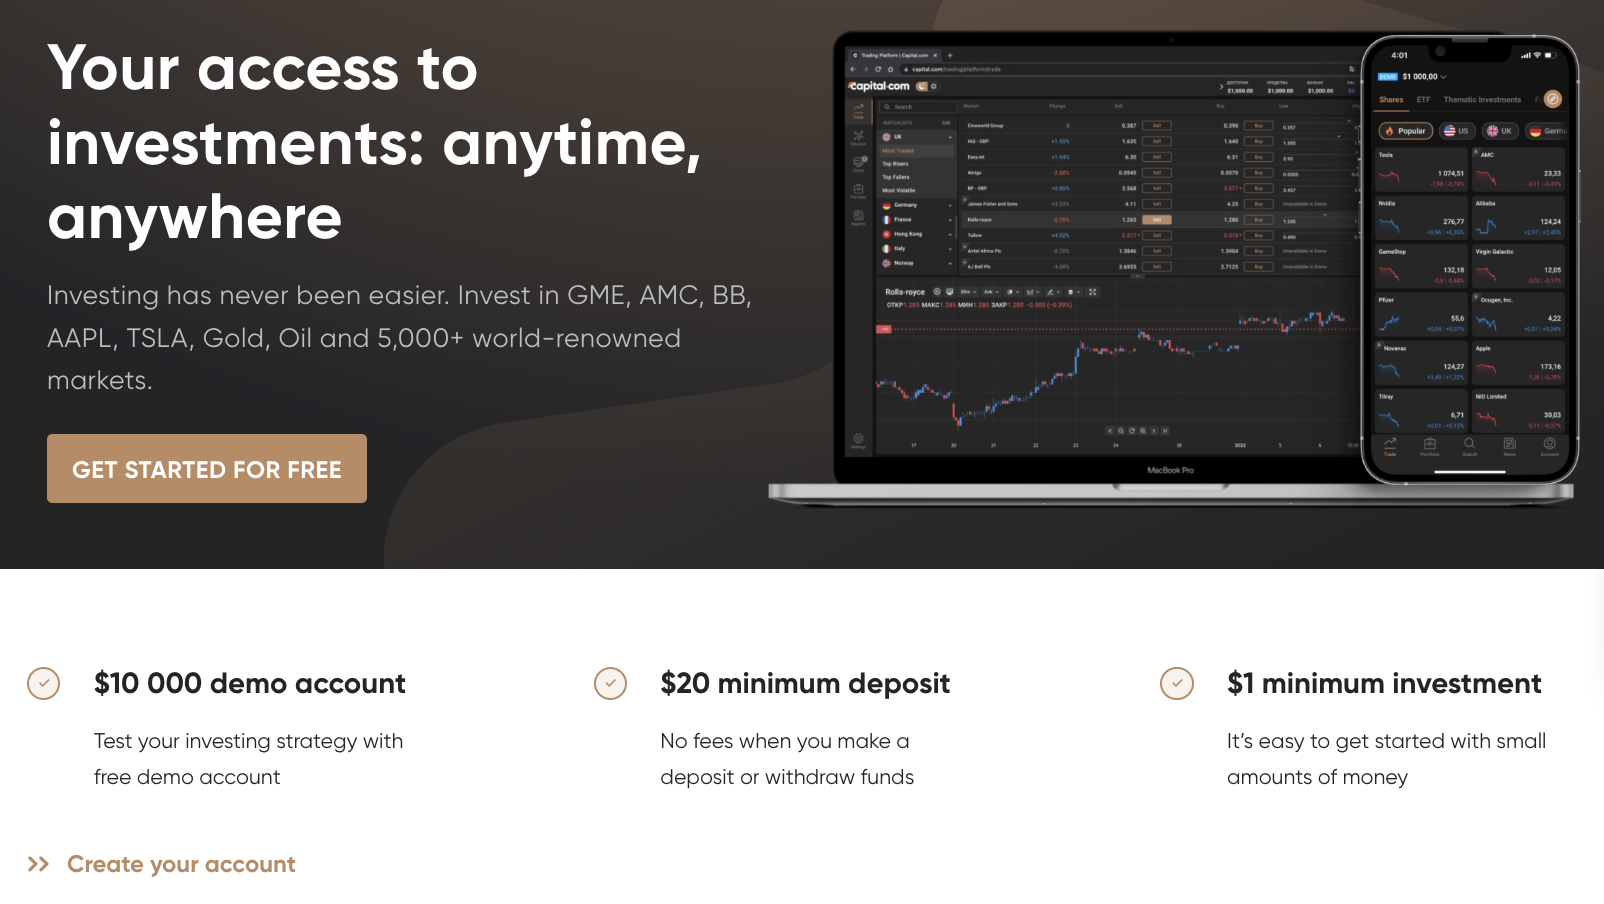 At Capital.com you can start with a virtual balance of $10,000 to practice trading